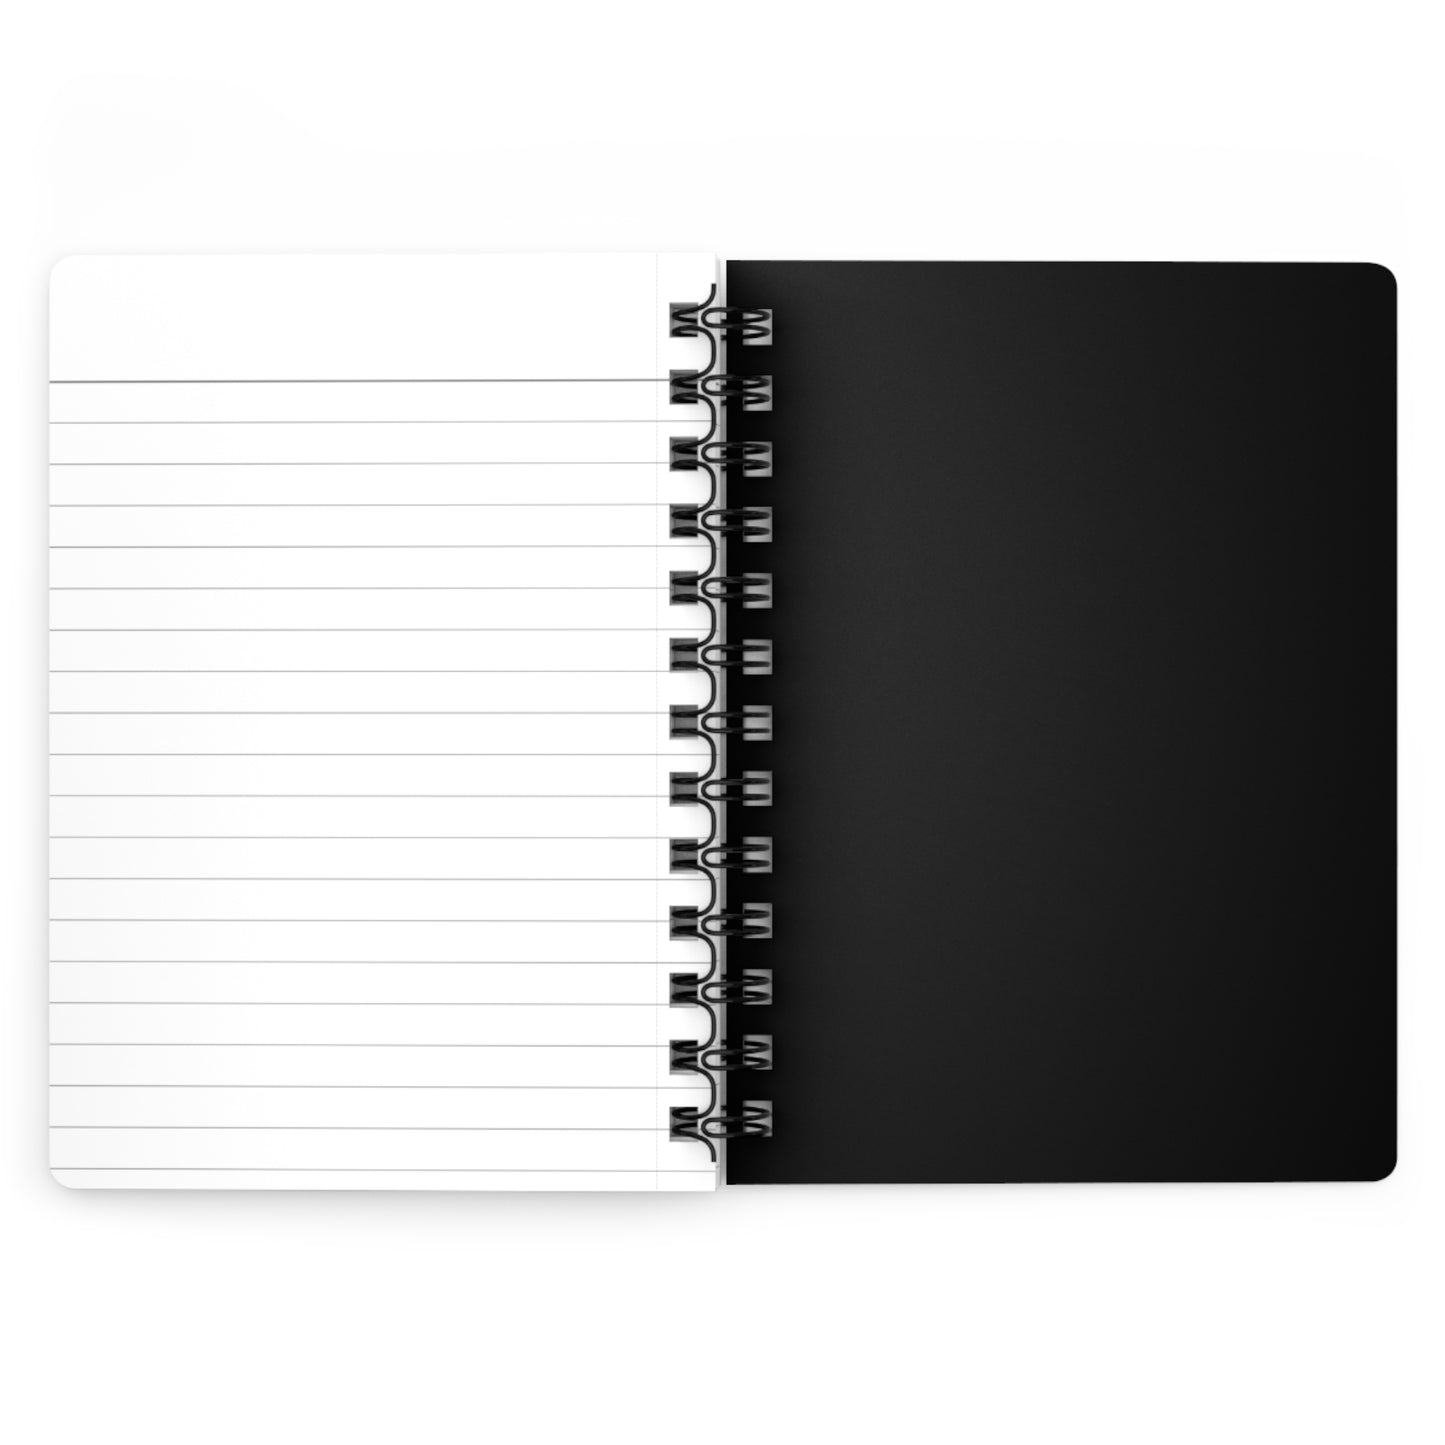 The King State Spiral Bound Notebook